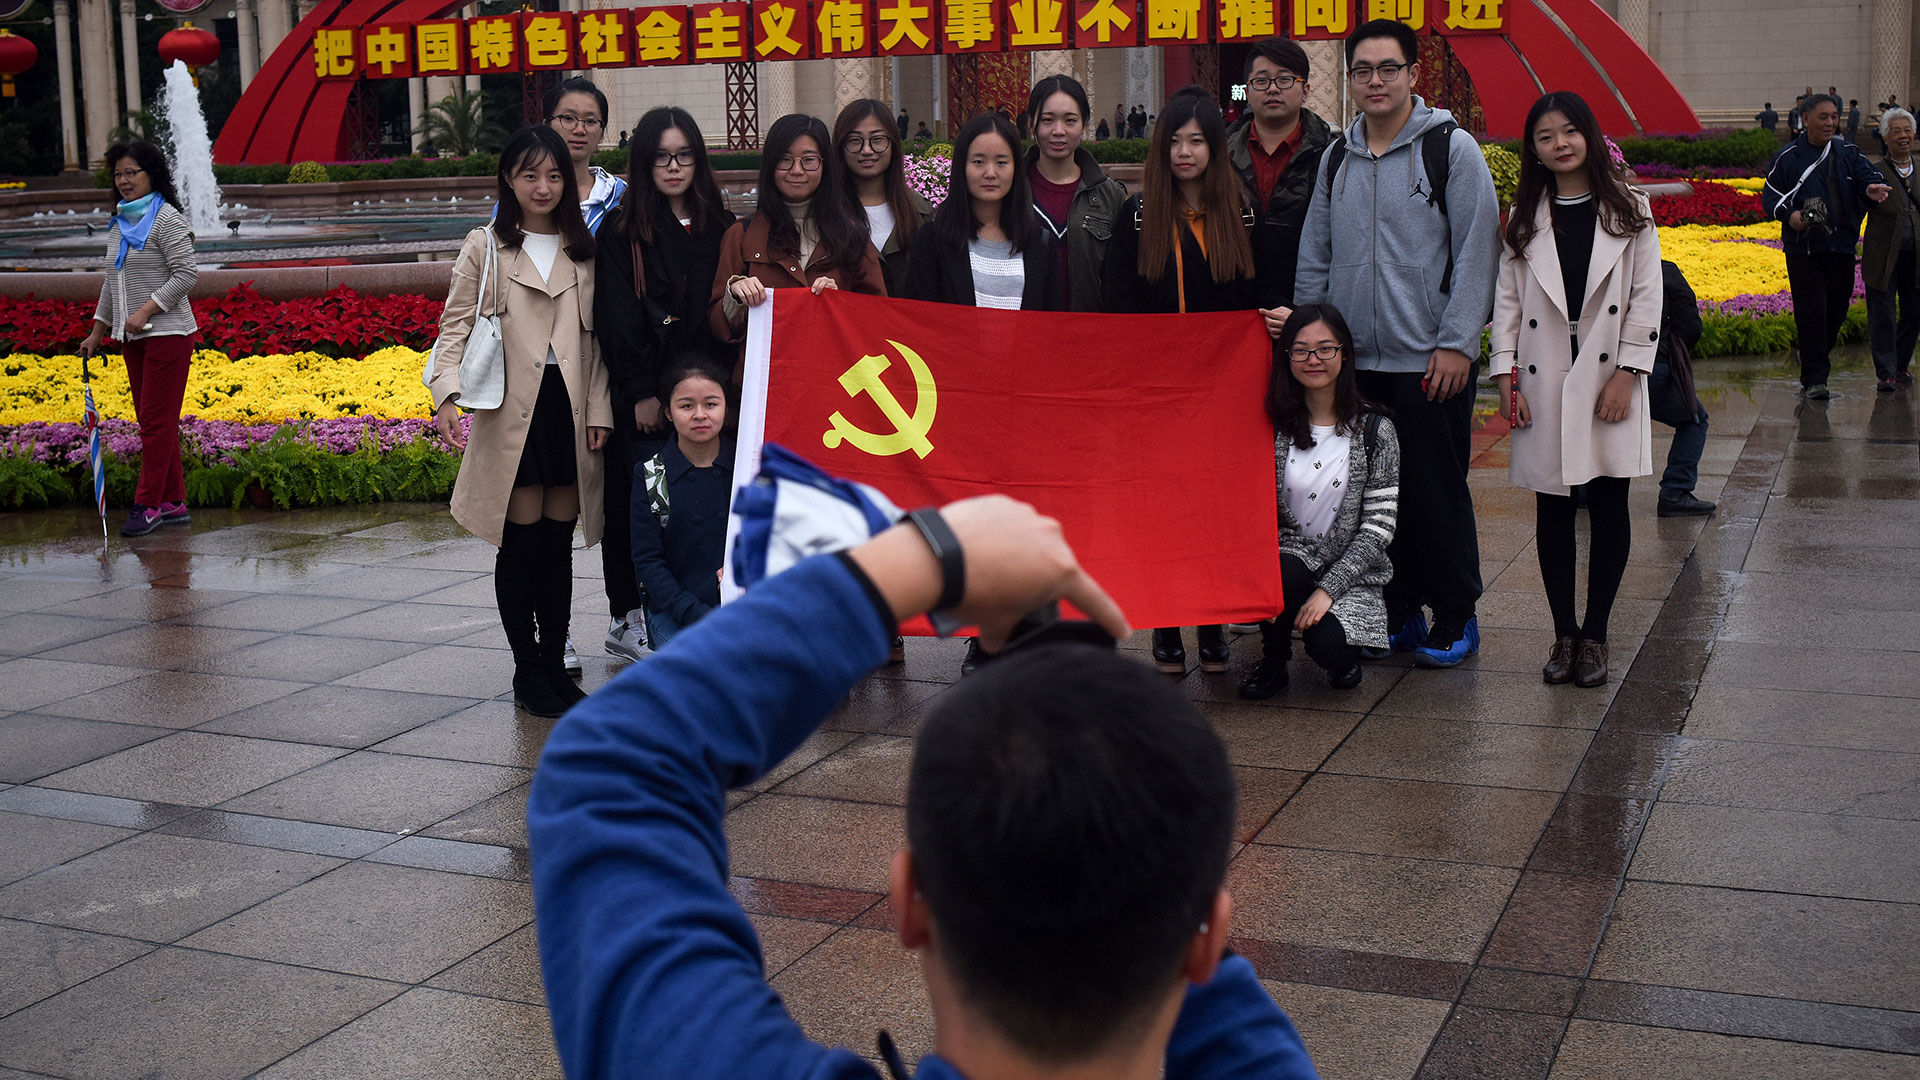 Who joins the Communist Party of China?